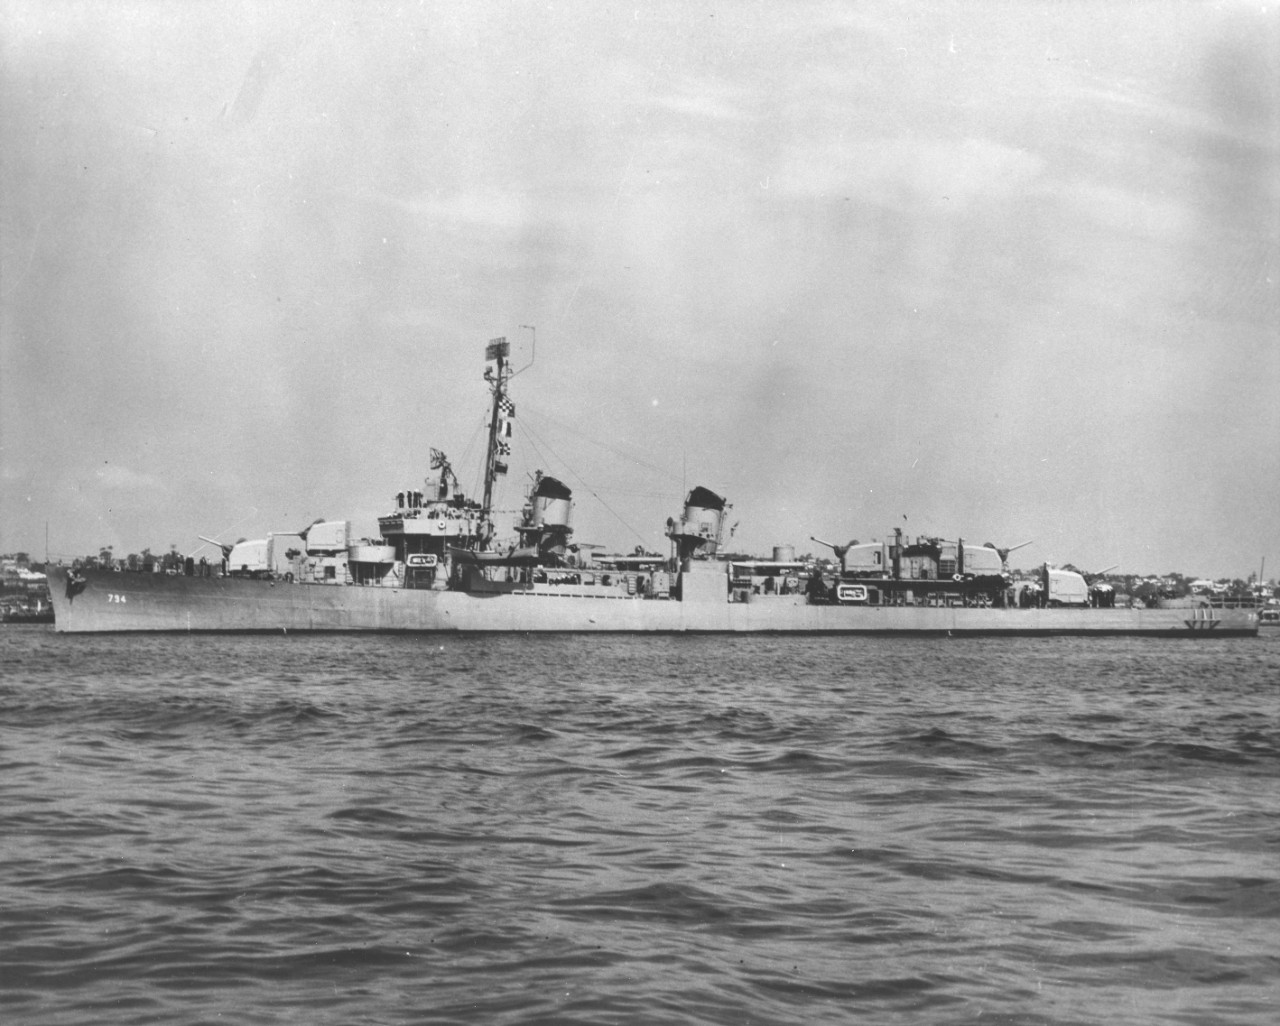 USS Irwin (DD-794) photographed in the early 1950s